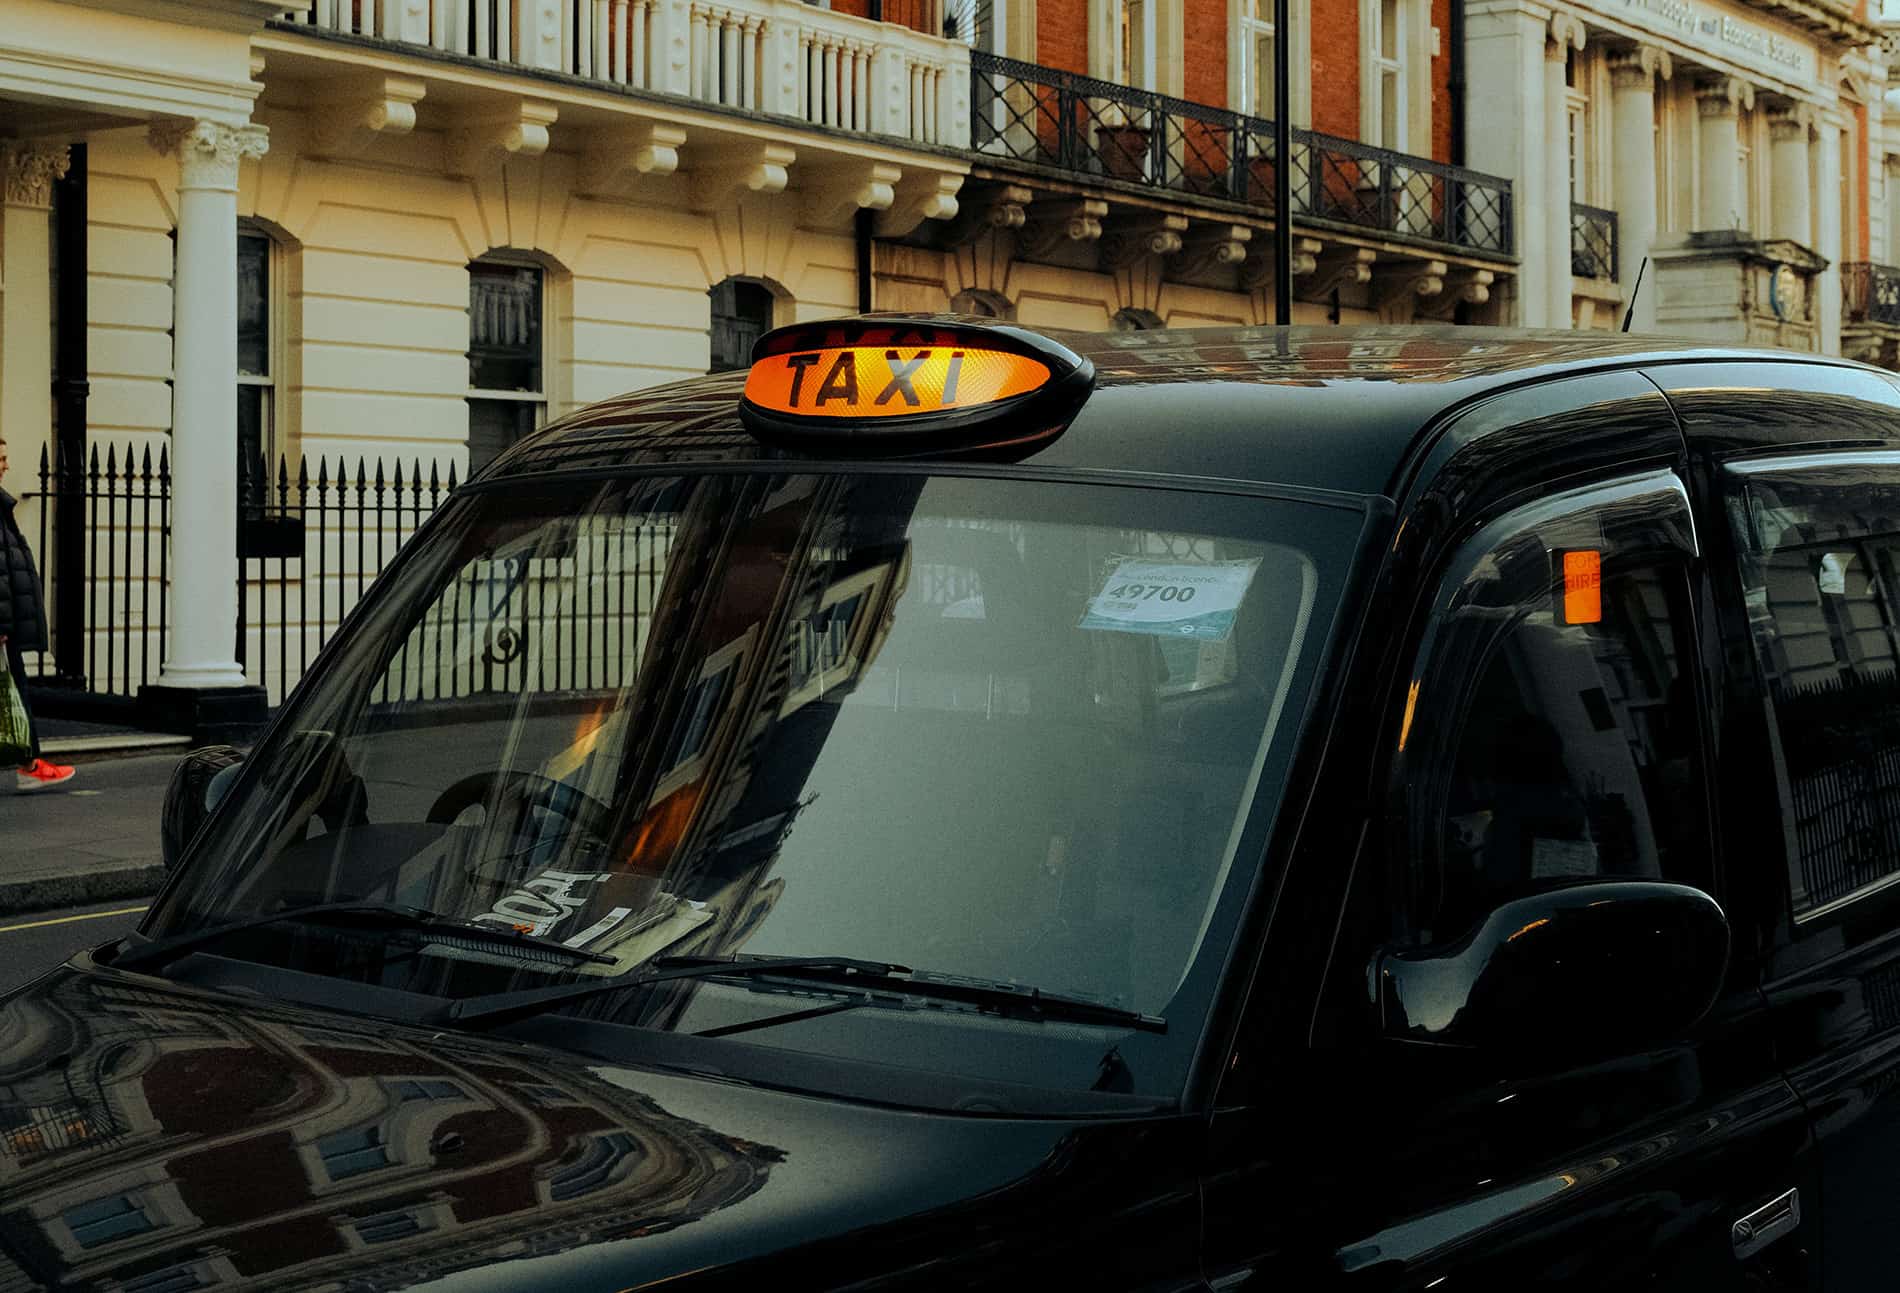 London’s black cabs set to hike fares significantly this Christmas